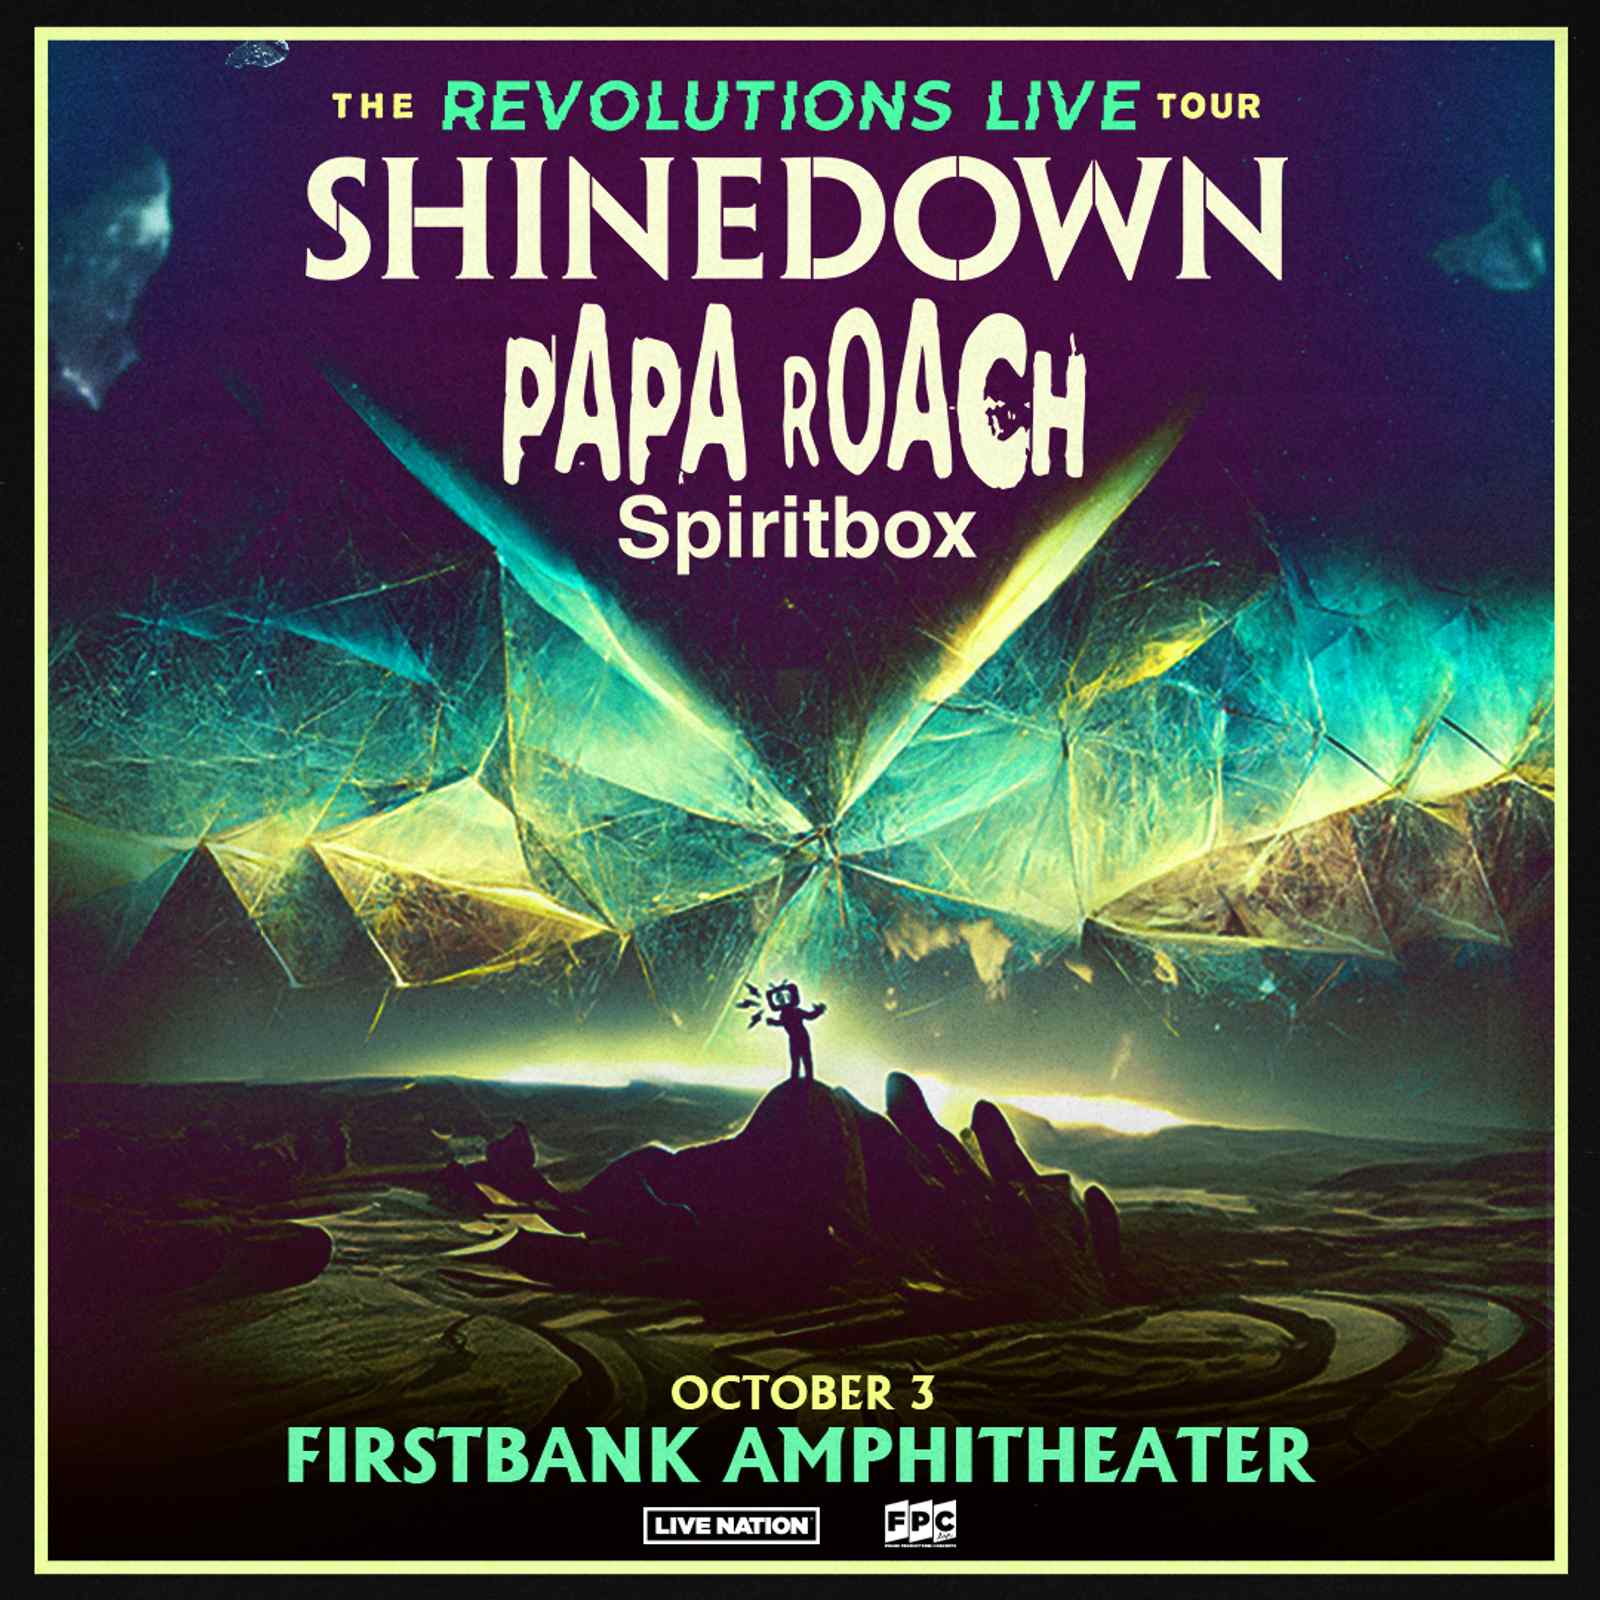 Shinedown The Revolutions Live Tour with special guests Papa Roach and Spiritbox to perform in Franklin, Tennessee at FirstBank Amphitheater.